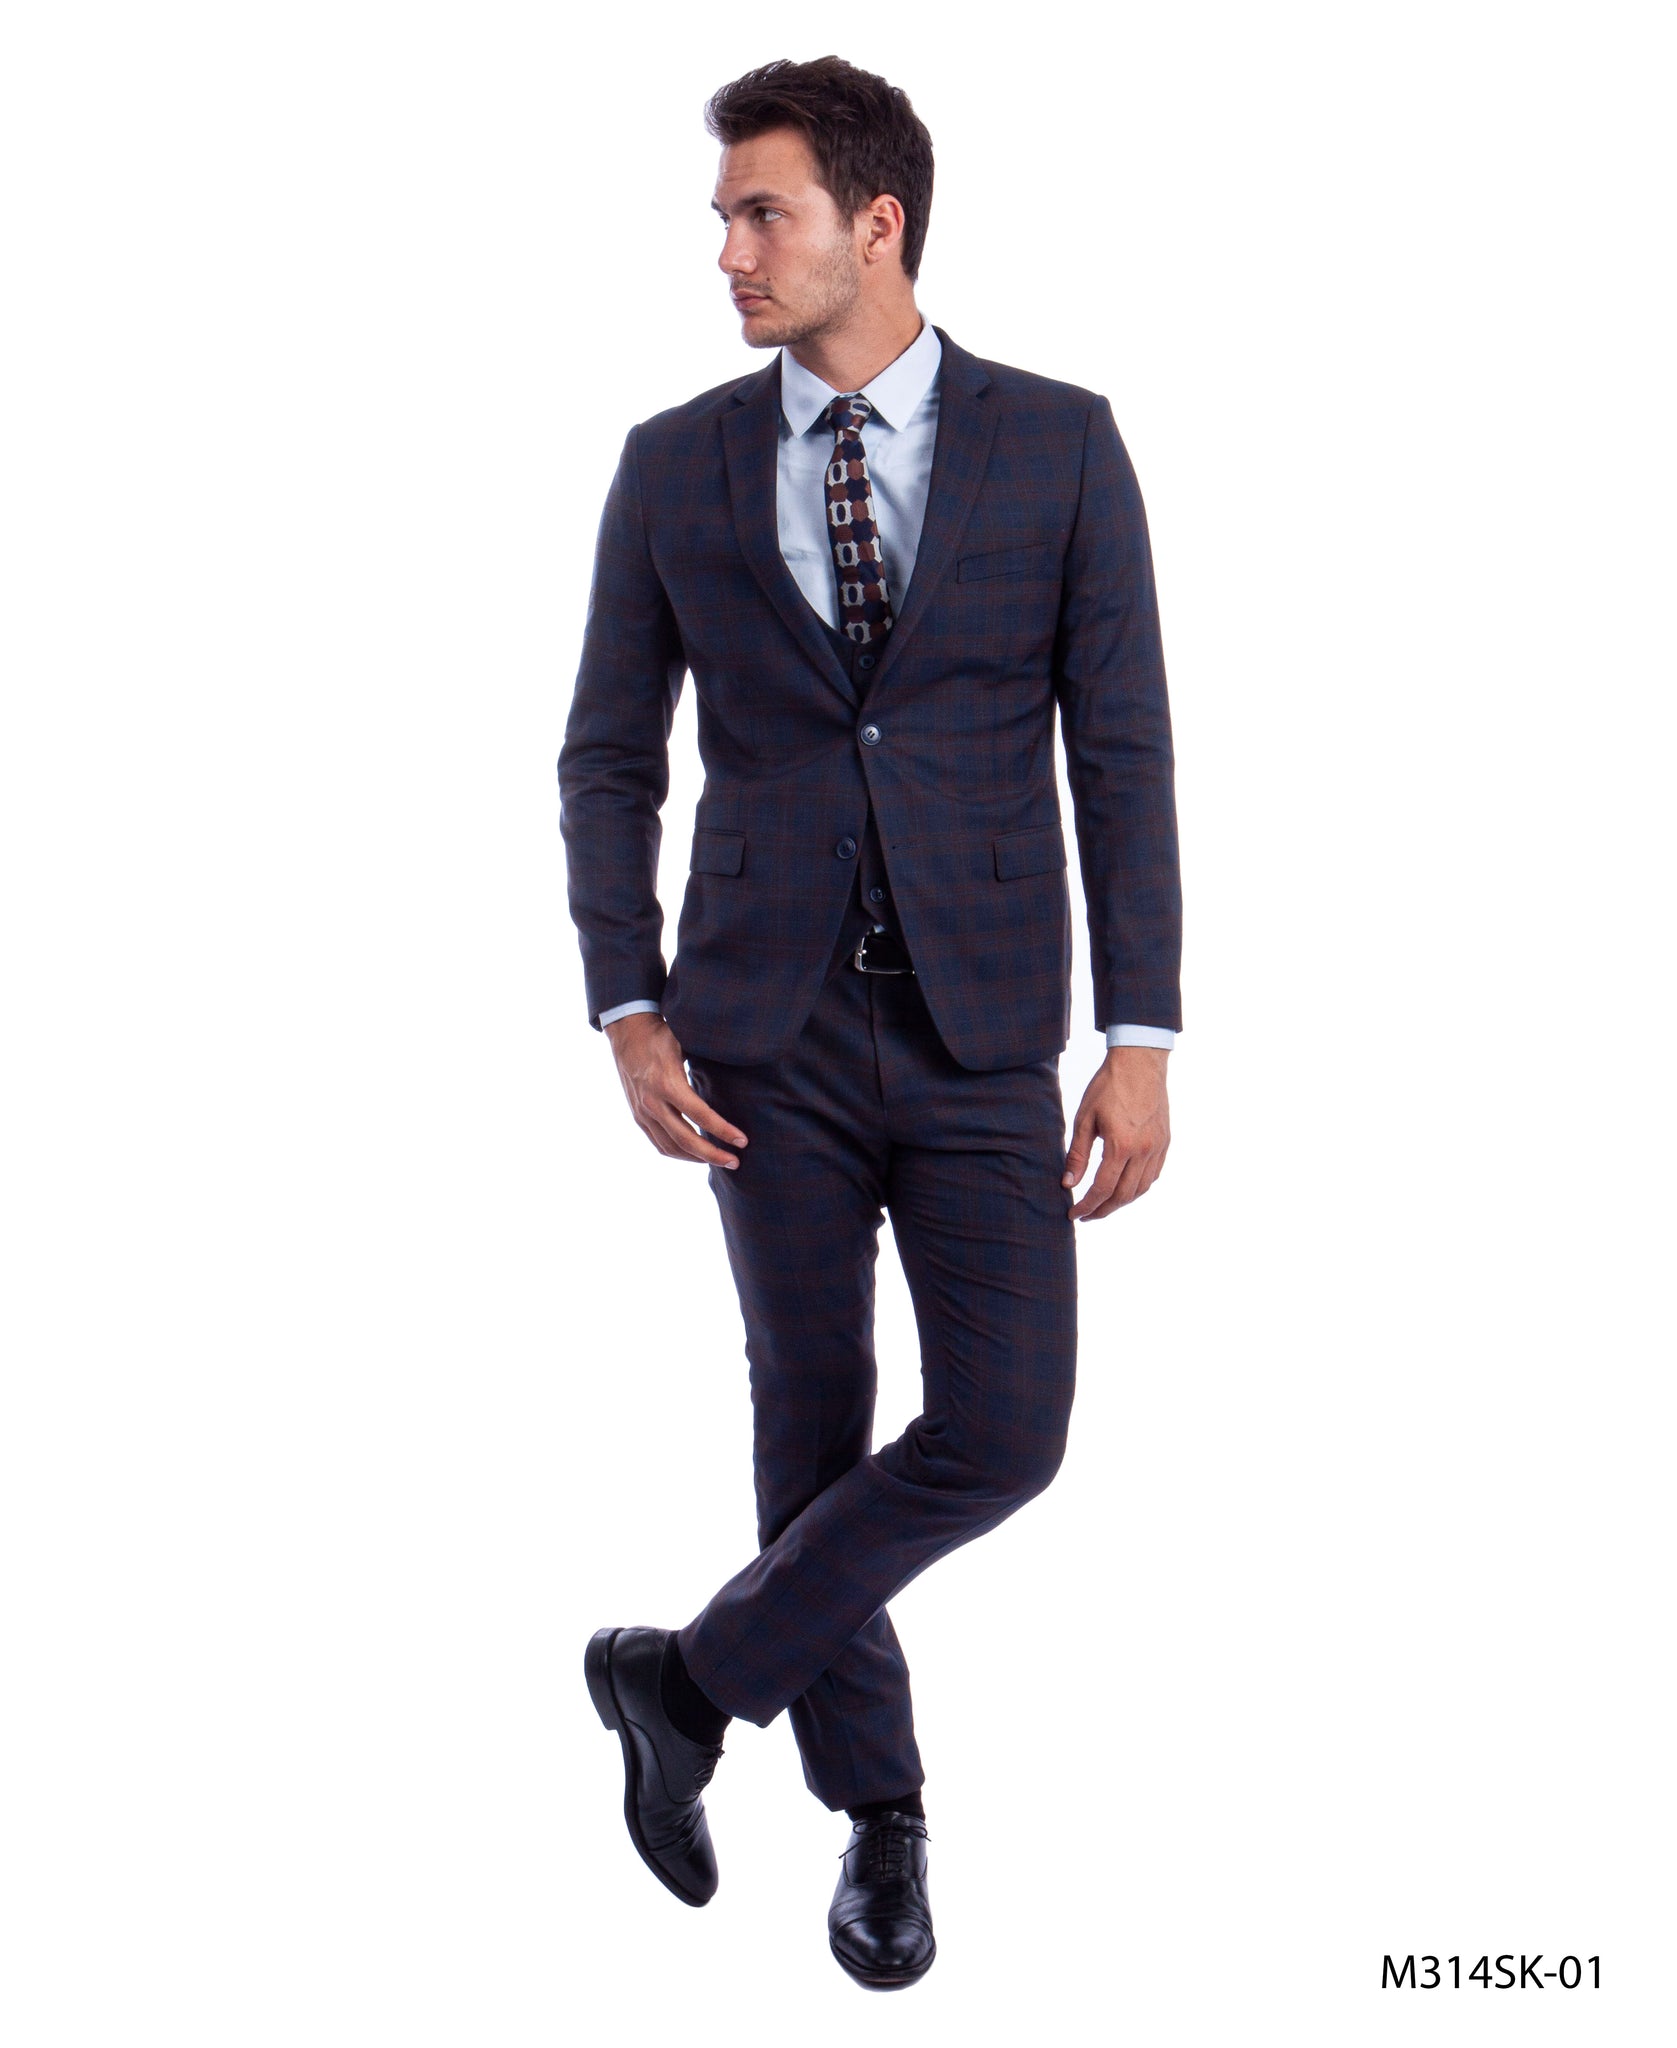 Blue/Brown Suit For Men Formal Suits For All Ocassions